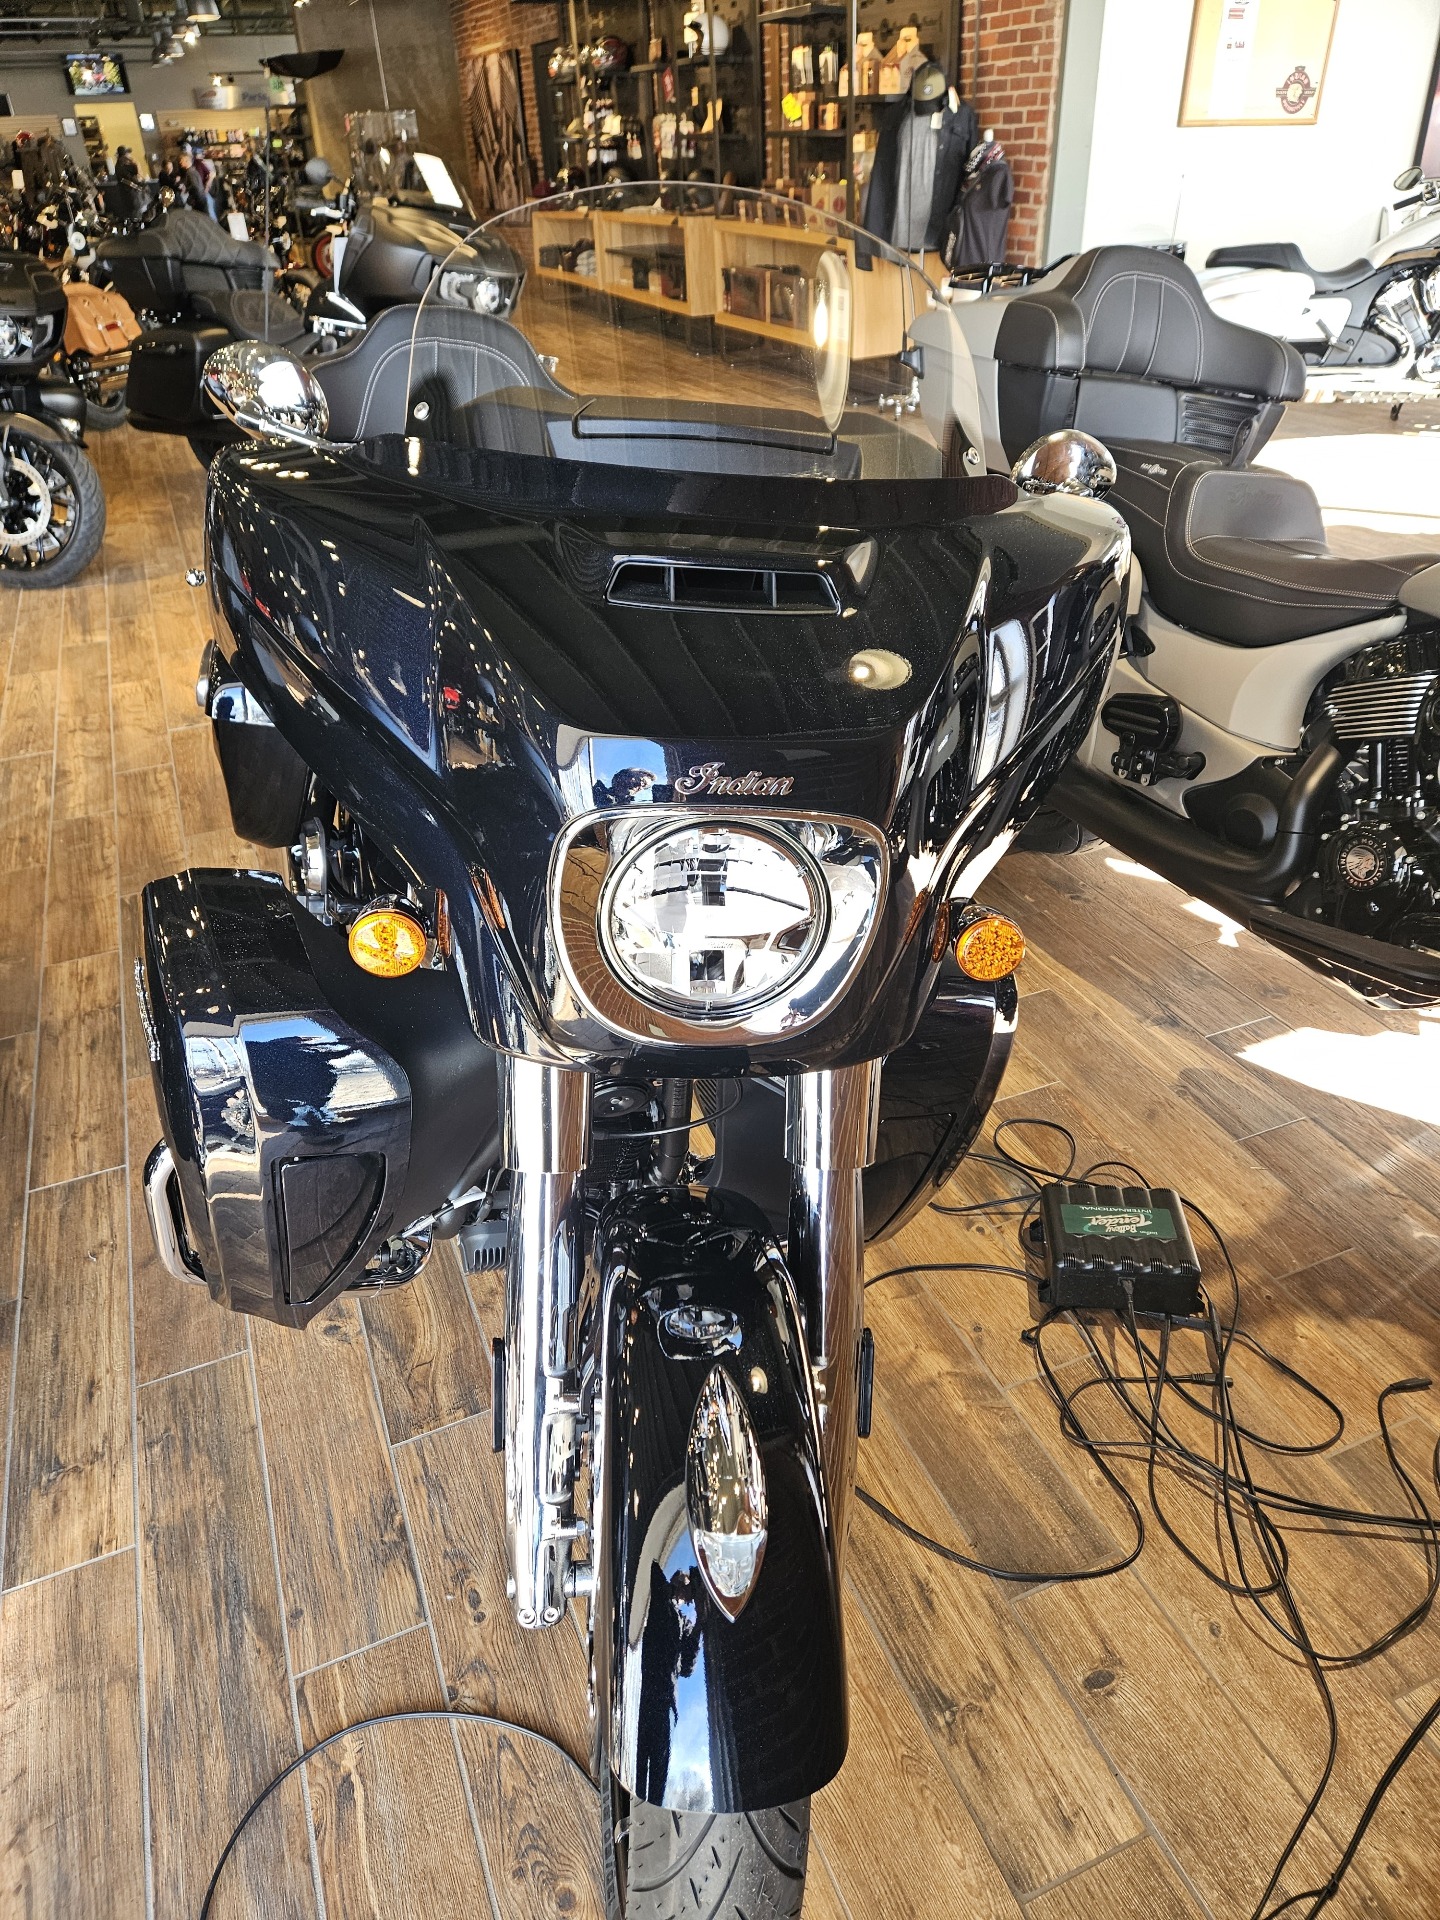 2023 Indian Motorcycle Roadmaster® Limited in Bristol, Virginia - Photo 2